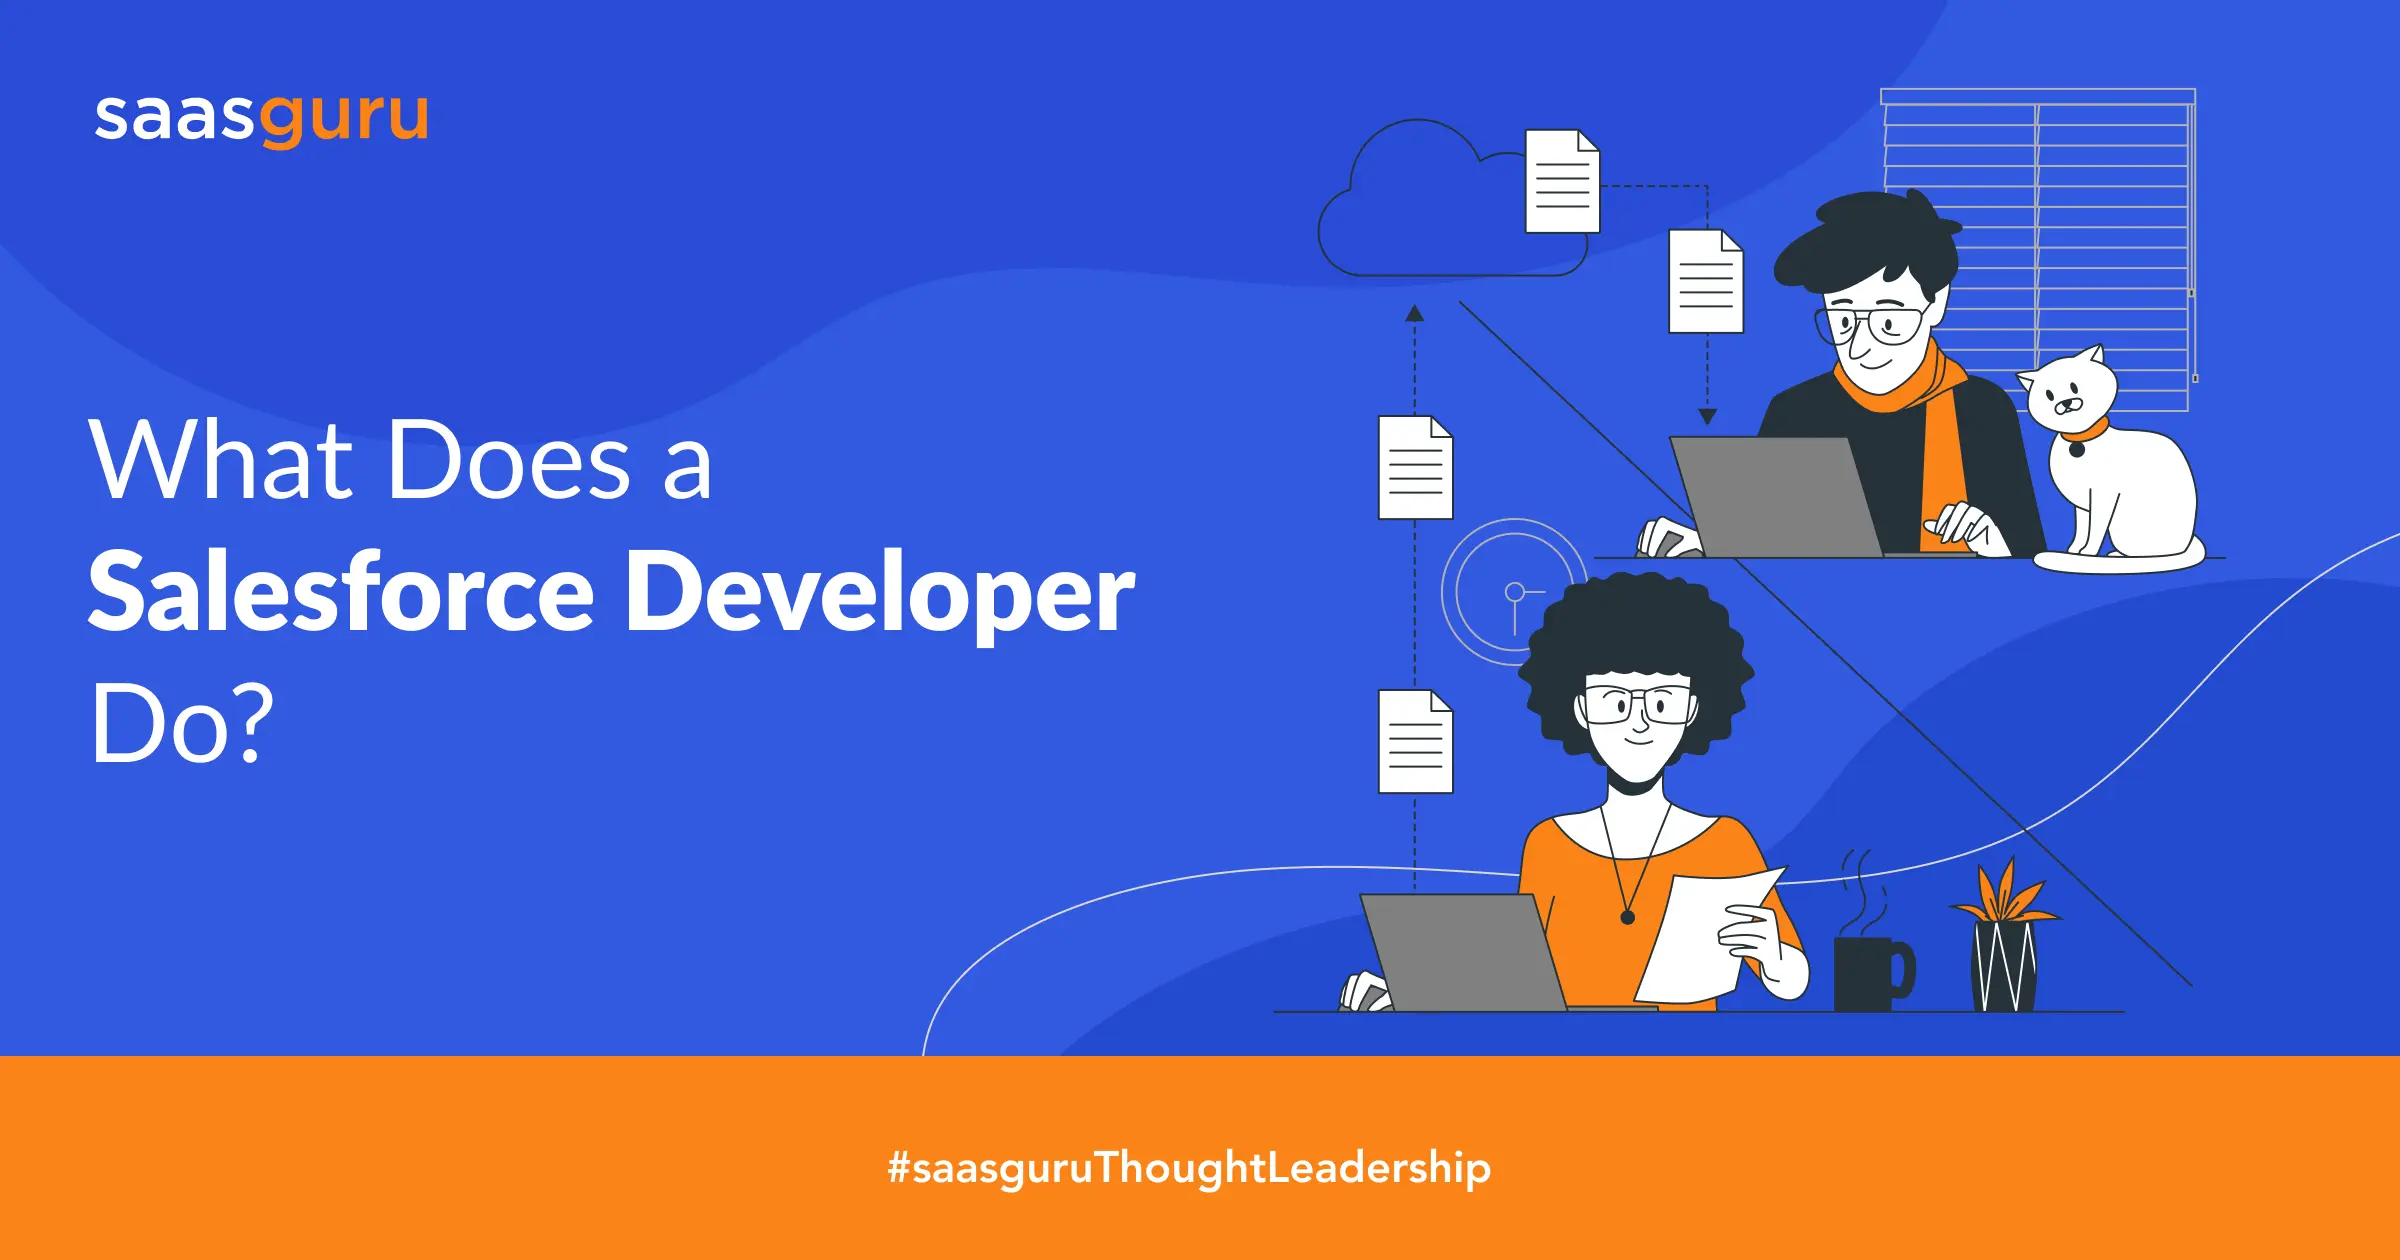 What Does a Salesforce Developer Do?